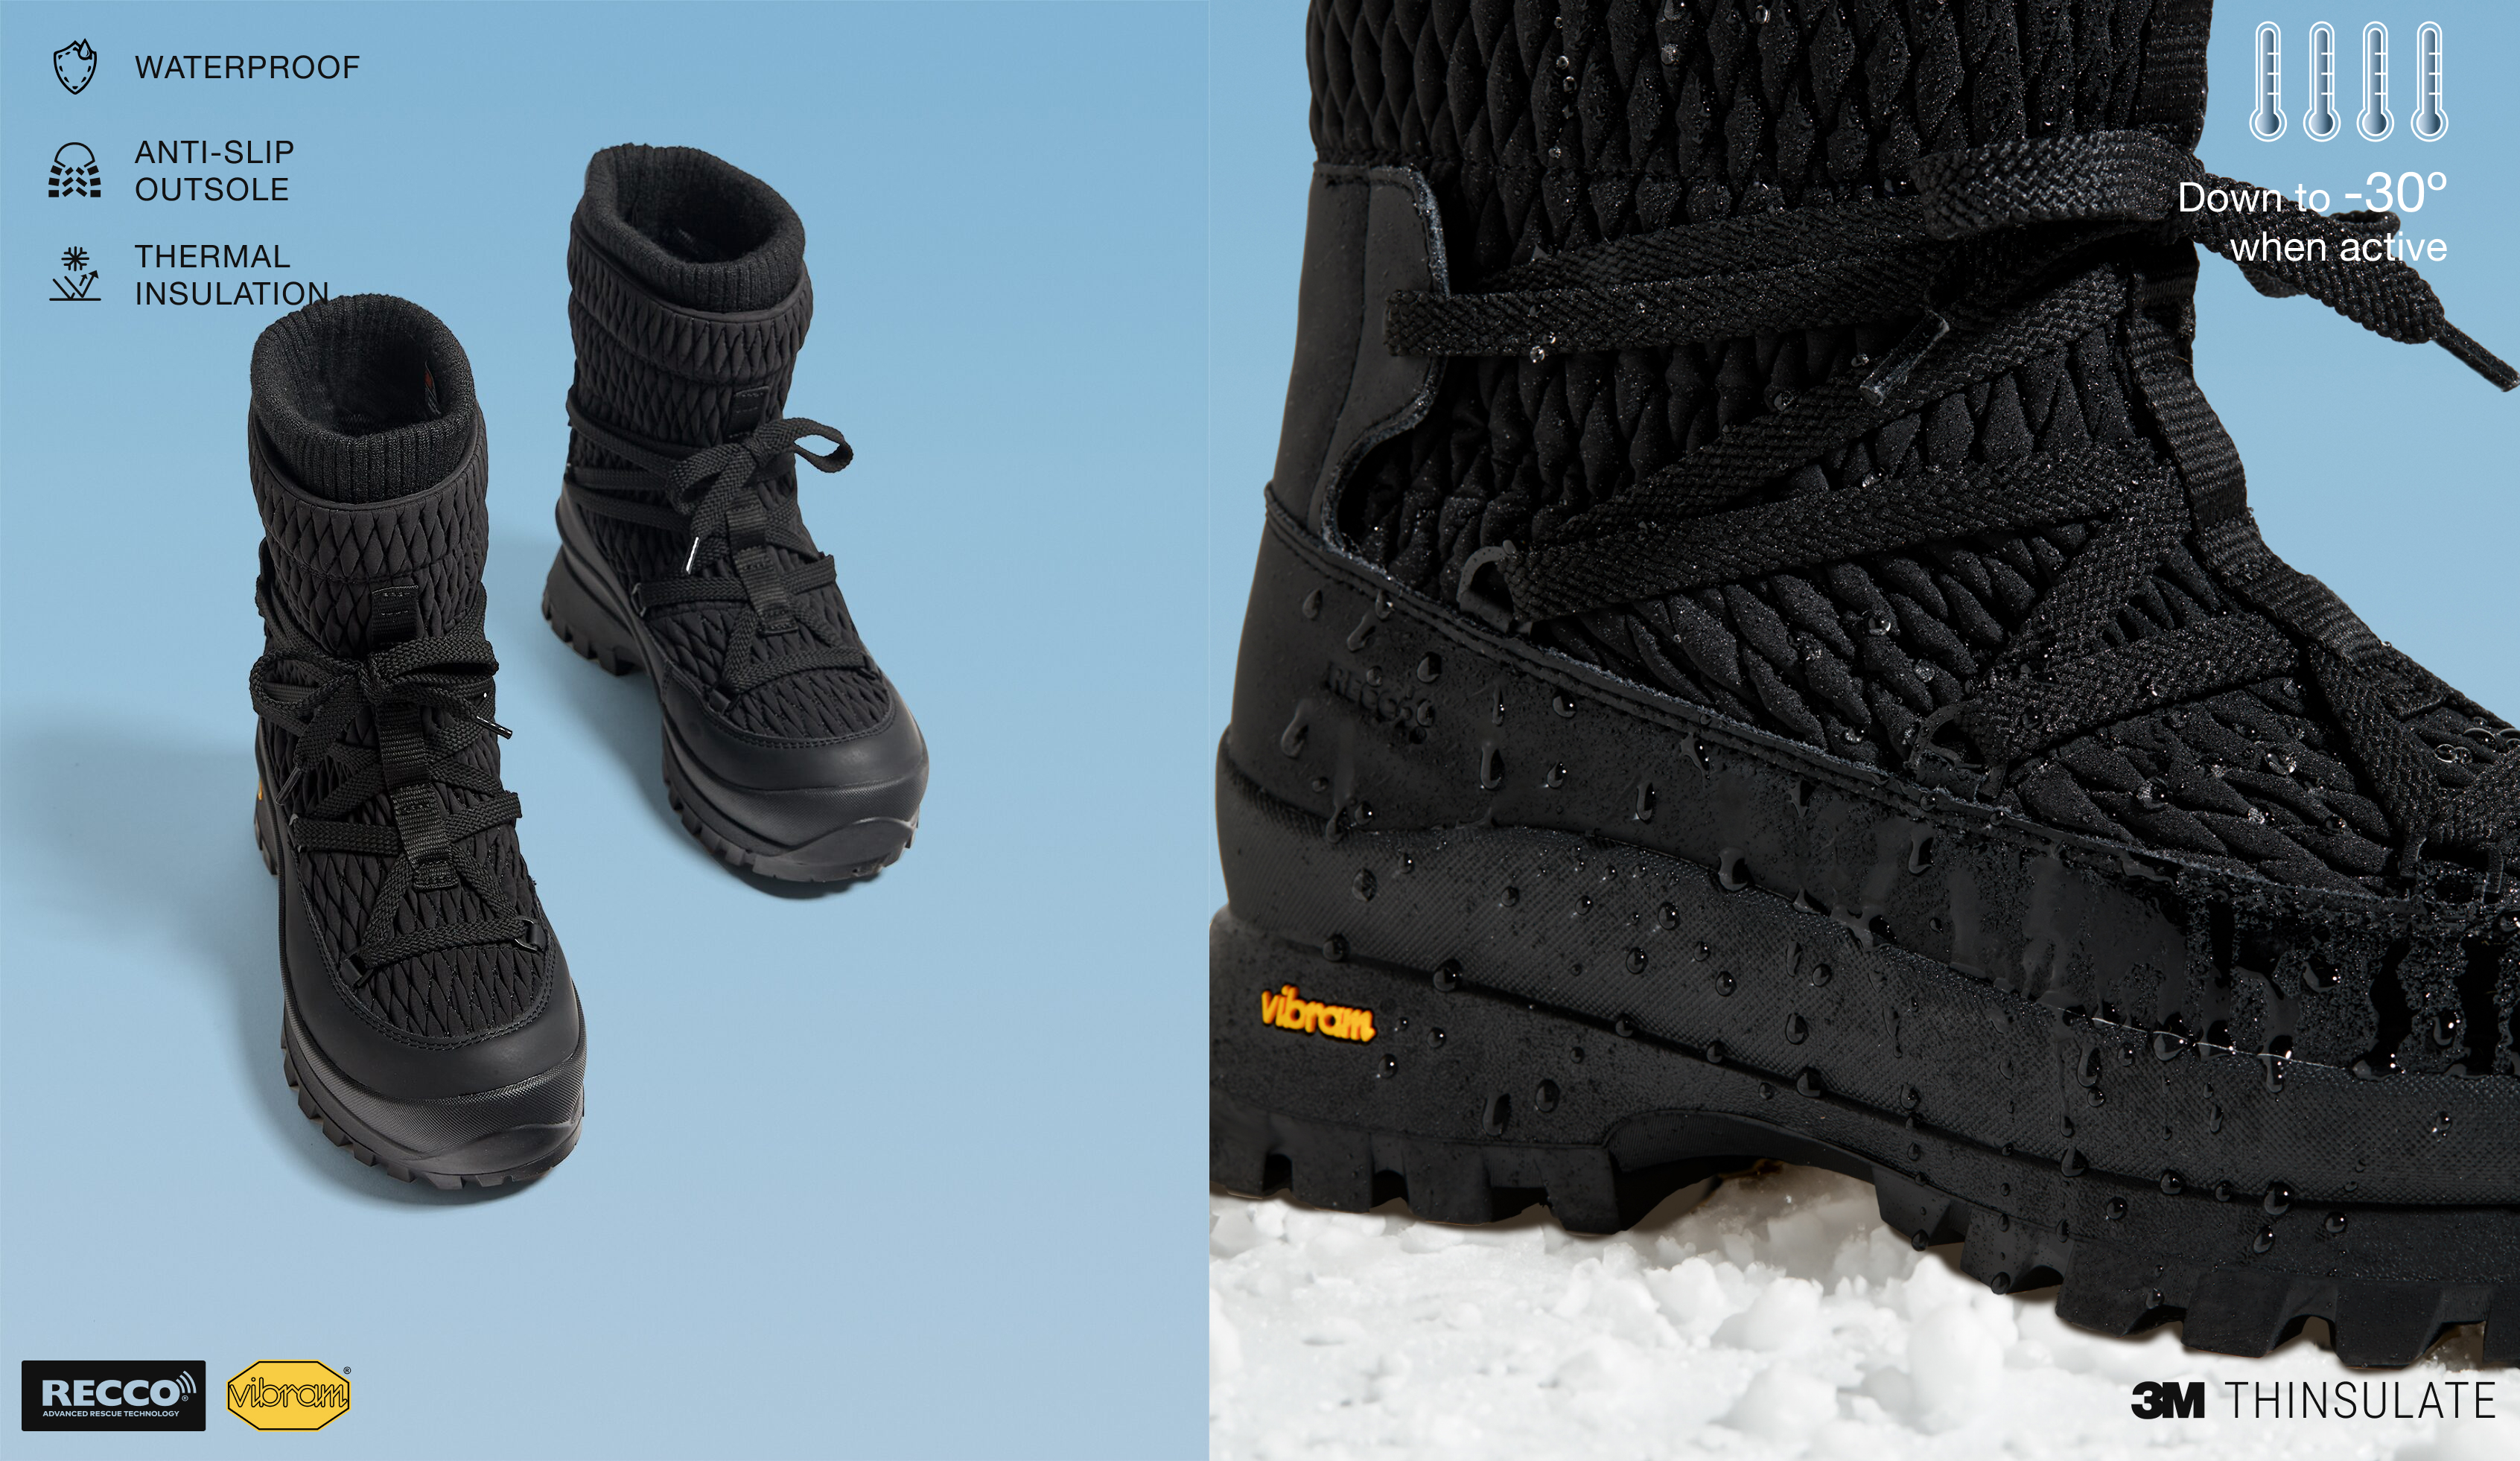 Waterproof 3M THINSULATE™ padded boots with Vibram® sole